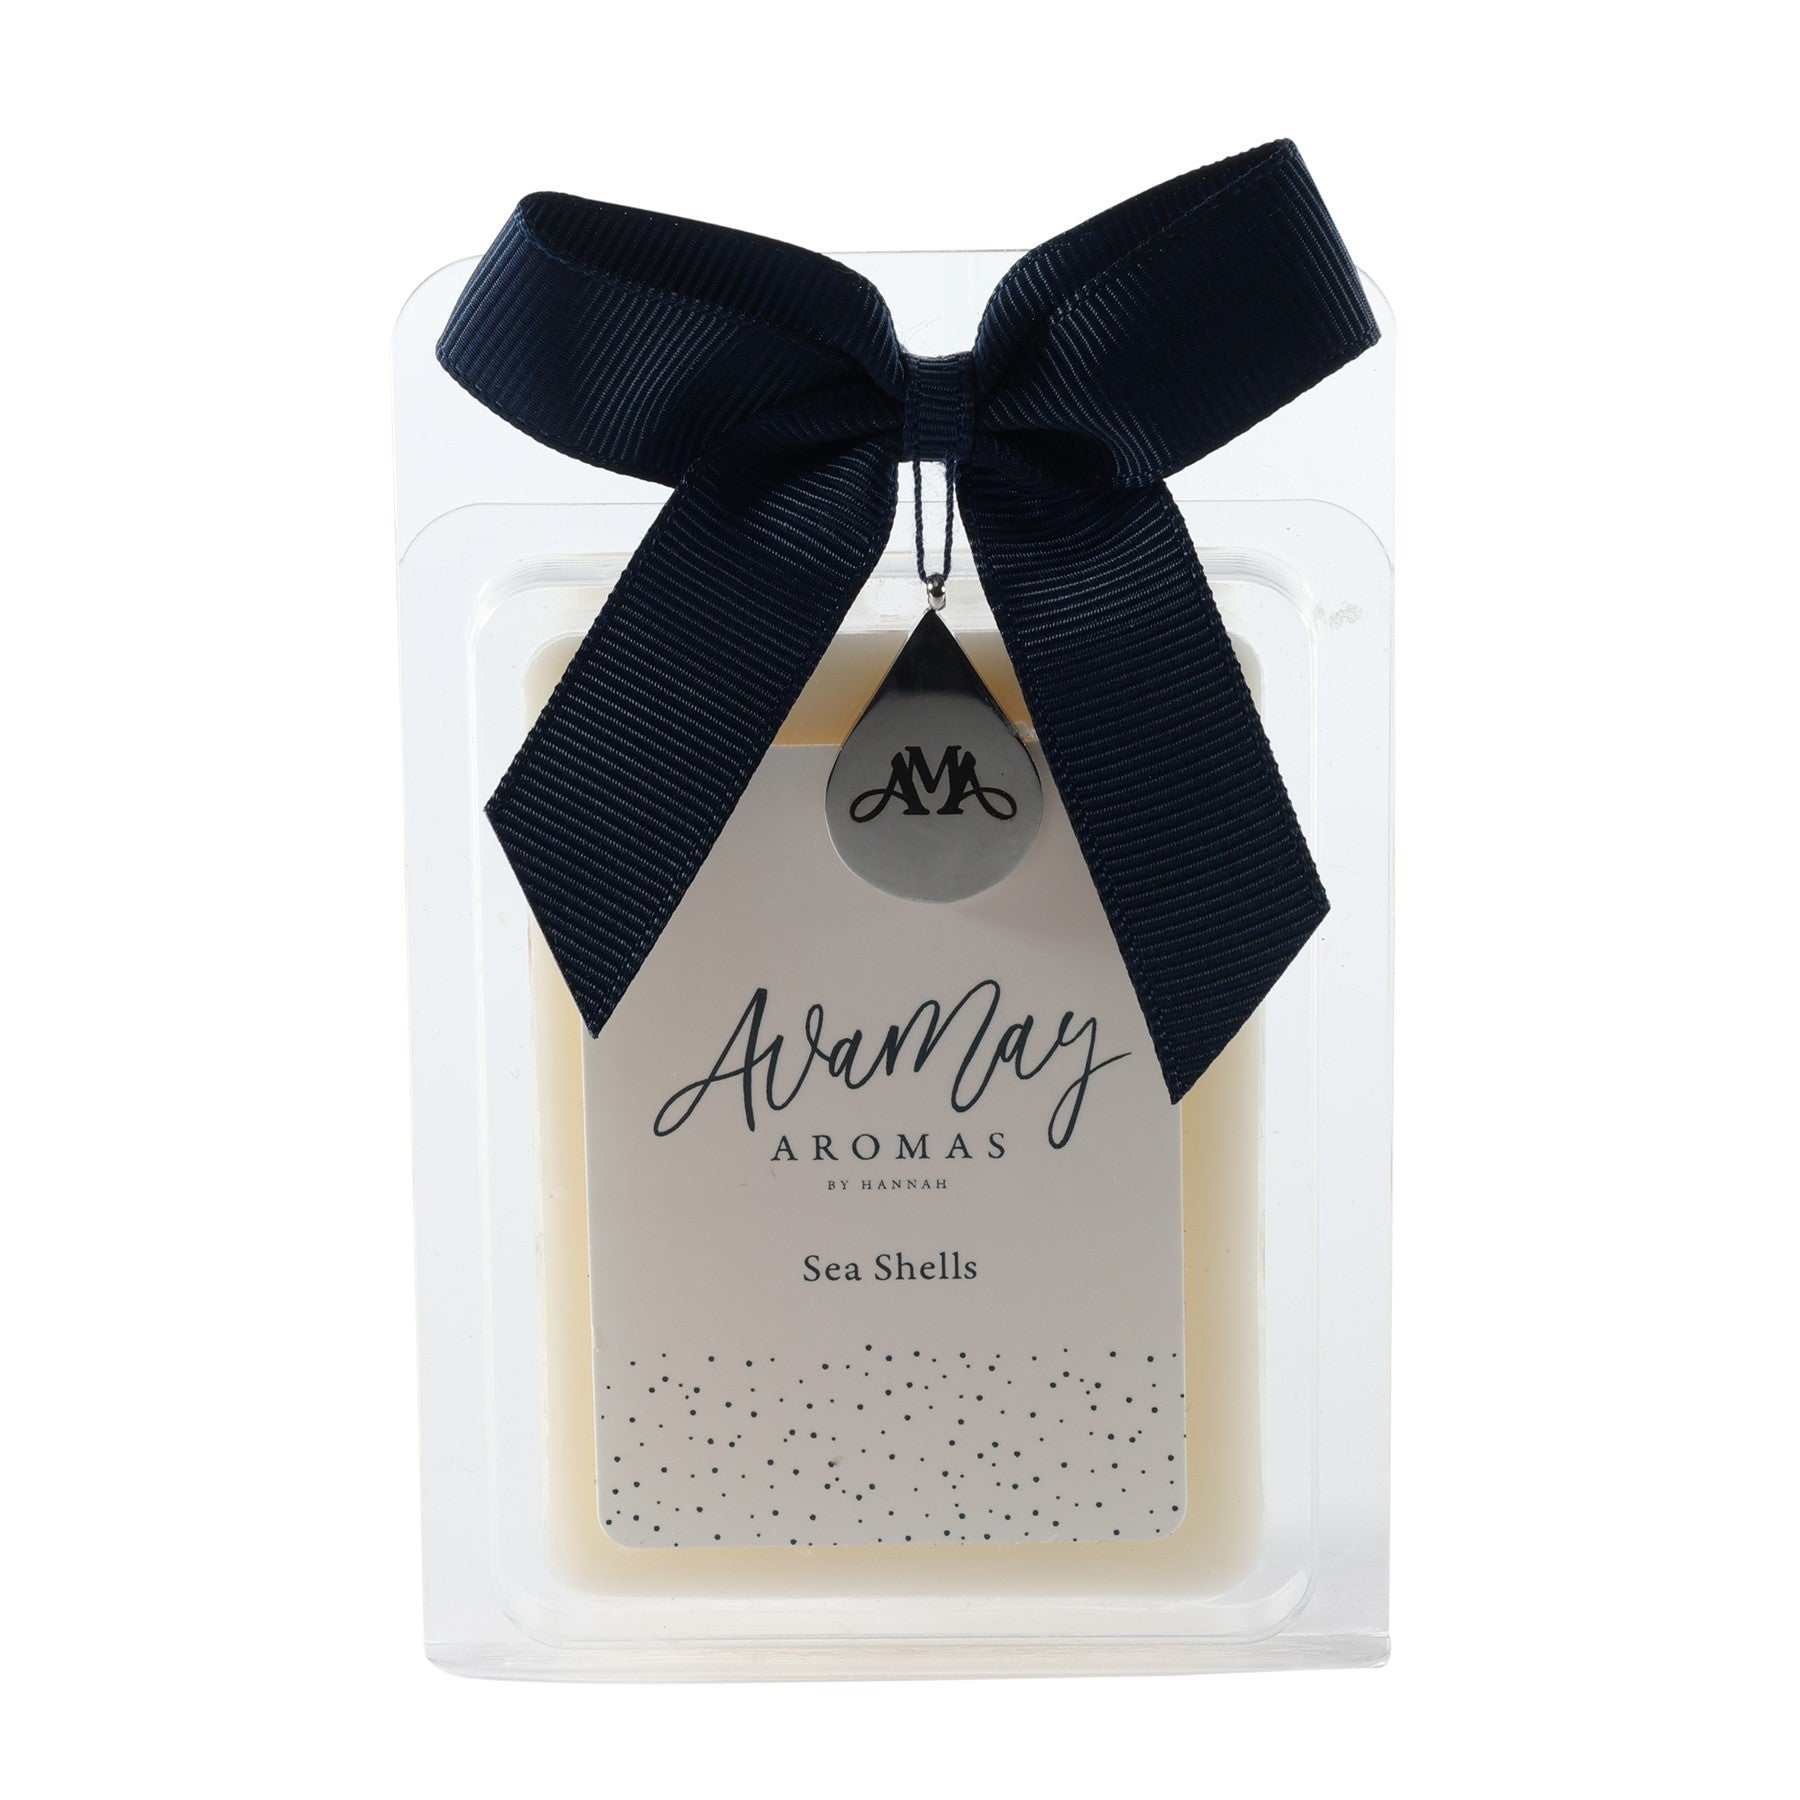 View Cosy Cashmere Wax Melts Ava May information